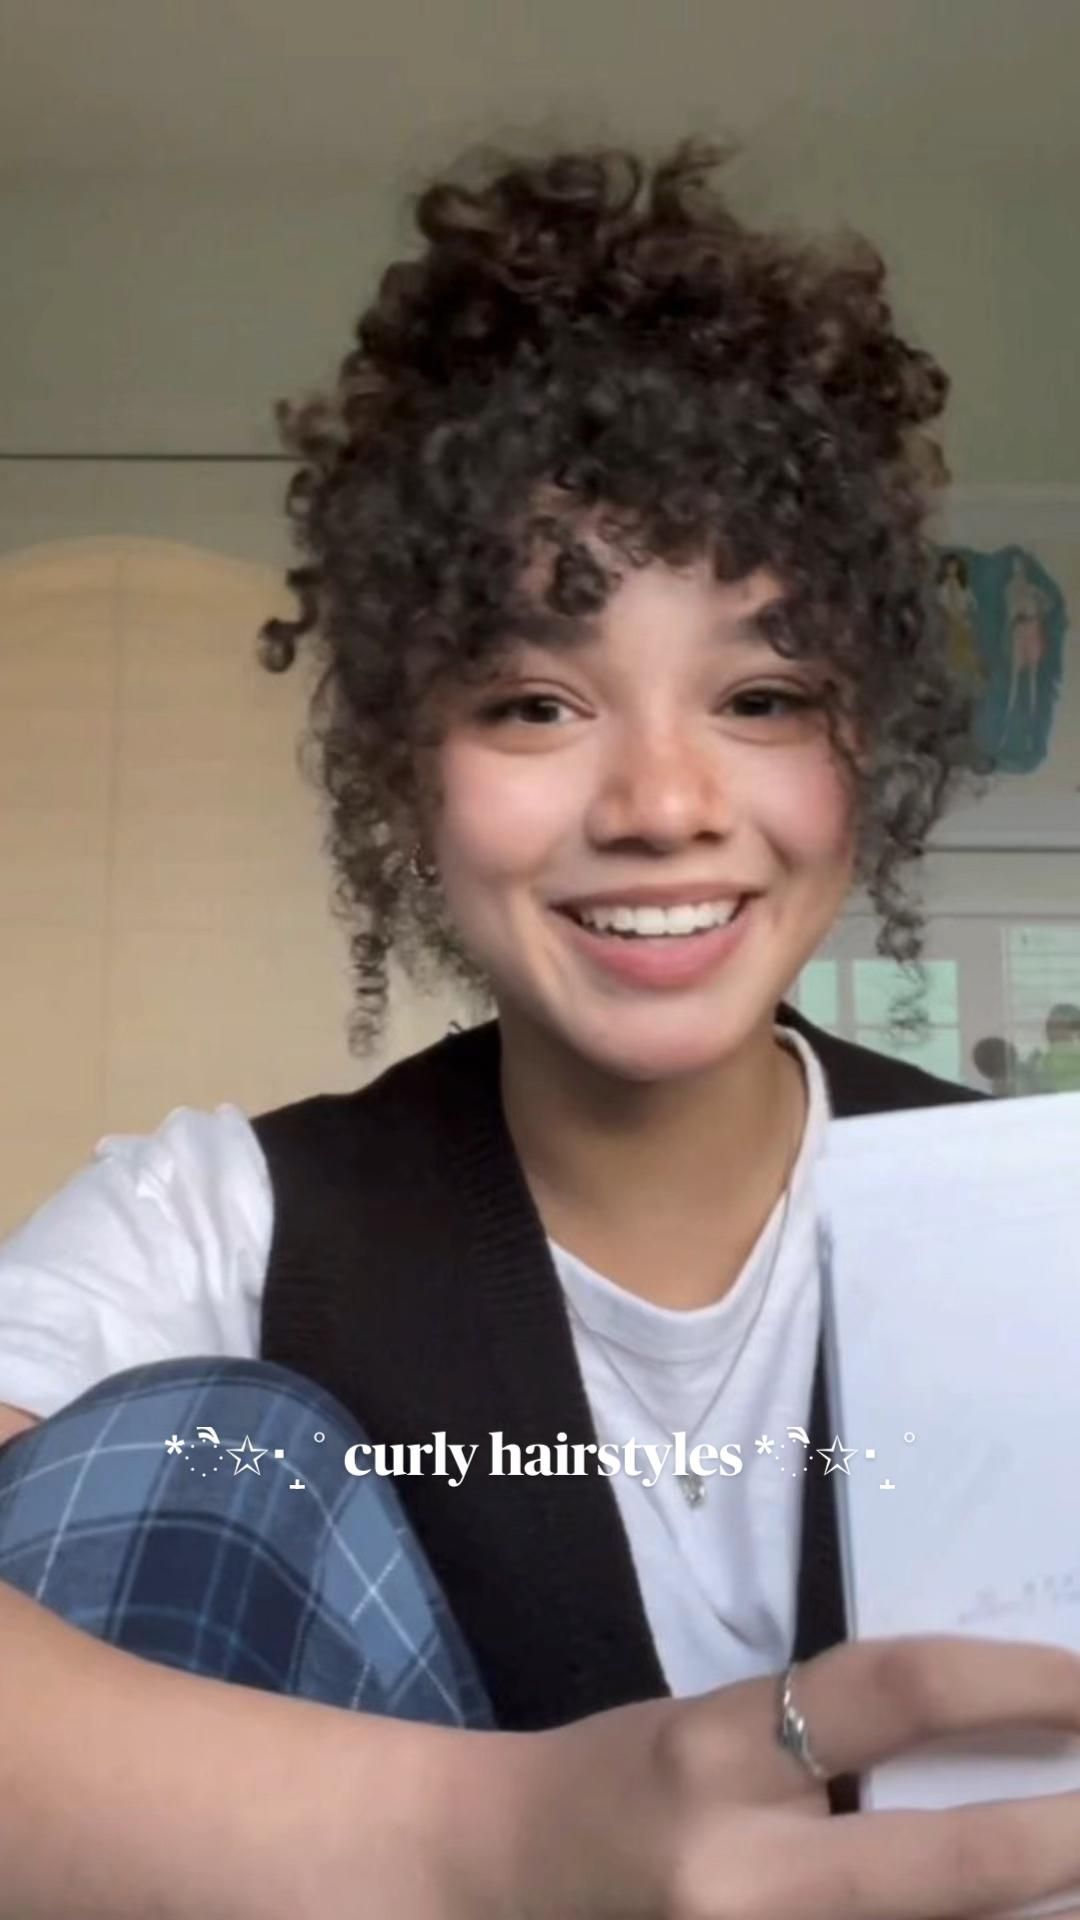 Top Hairstyles for Curly Hair: Embrace Your Natural Curls!